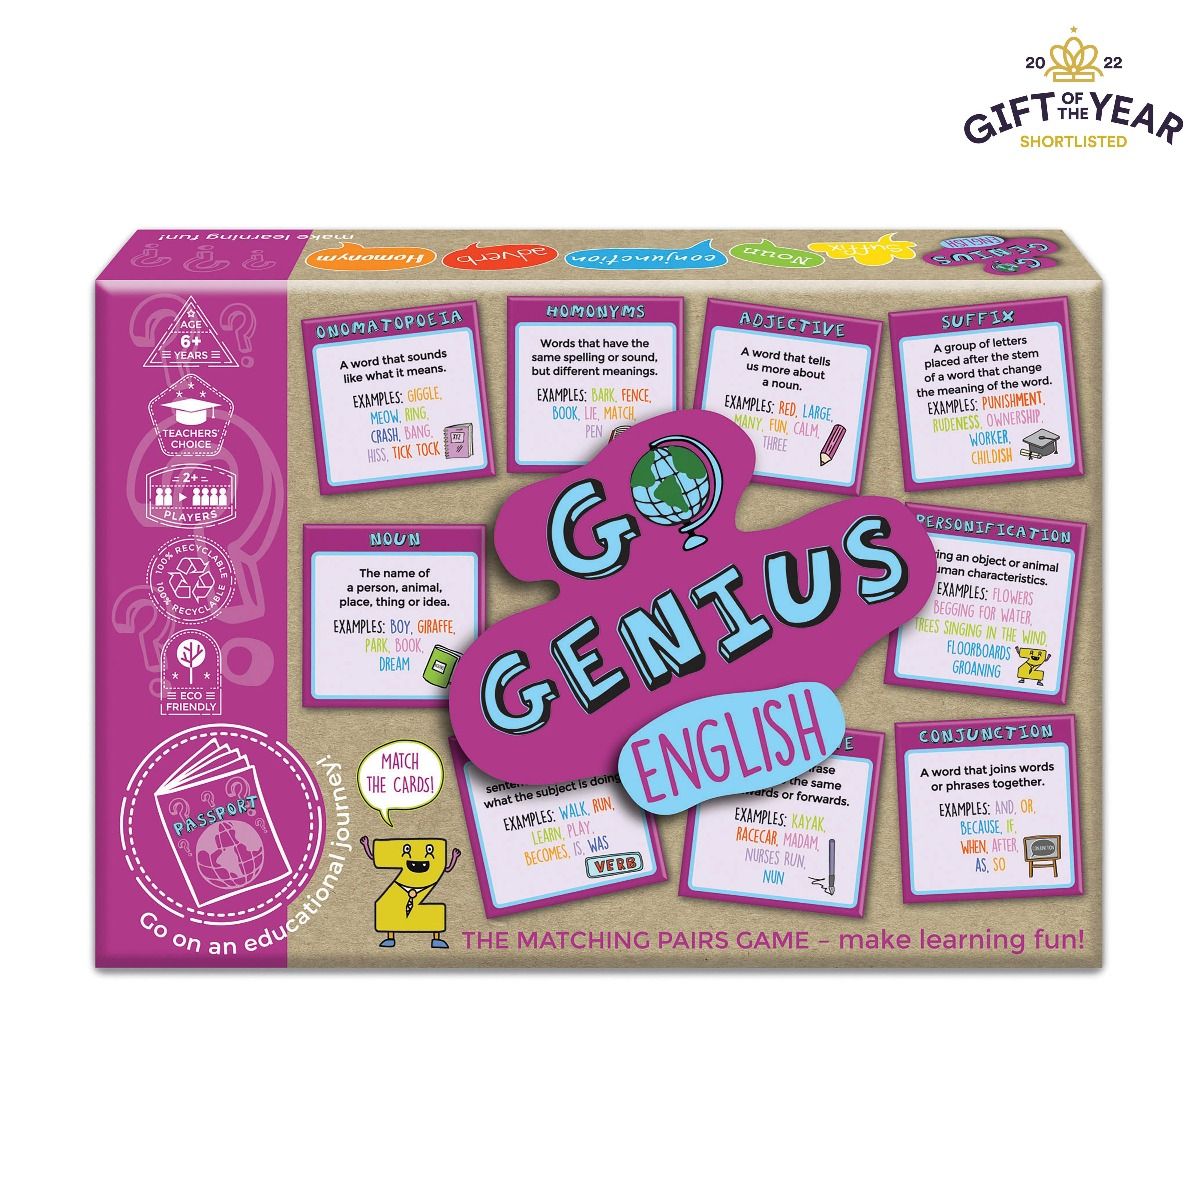 Go Genius English - The Matching Pairs Game - Gifts R Us